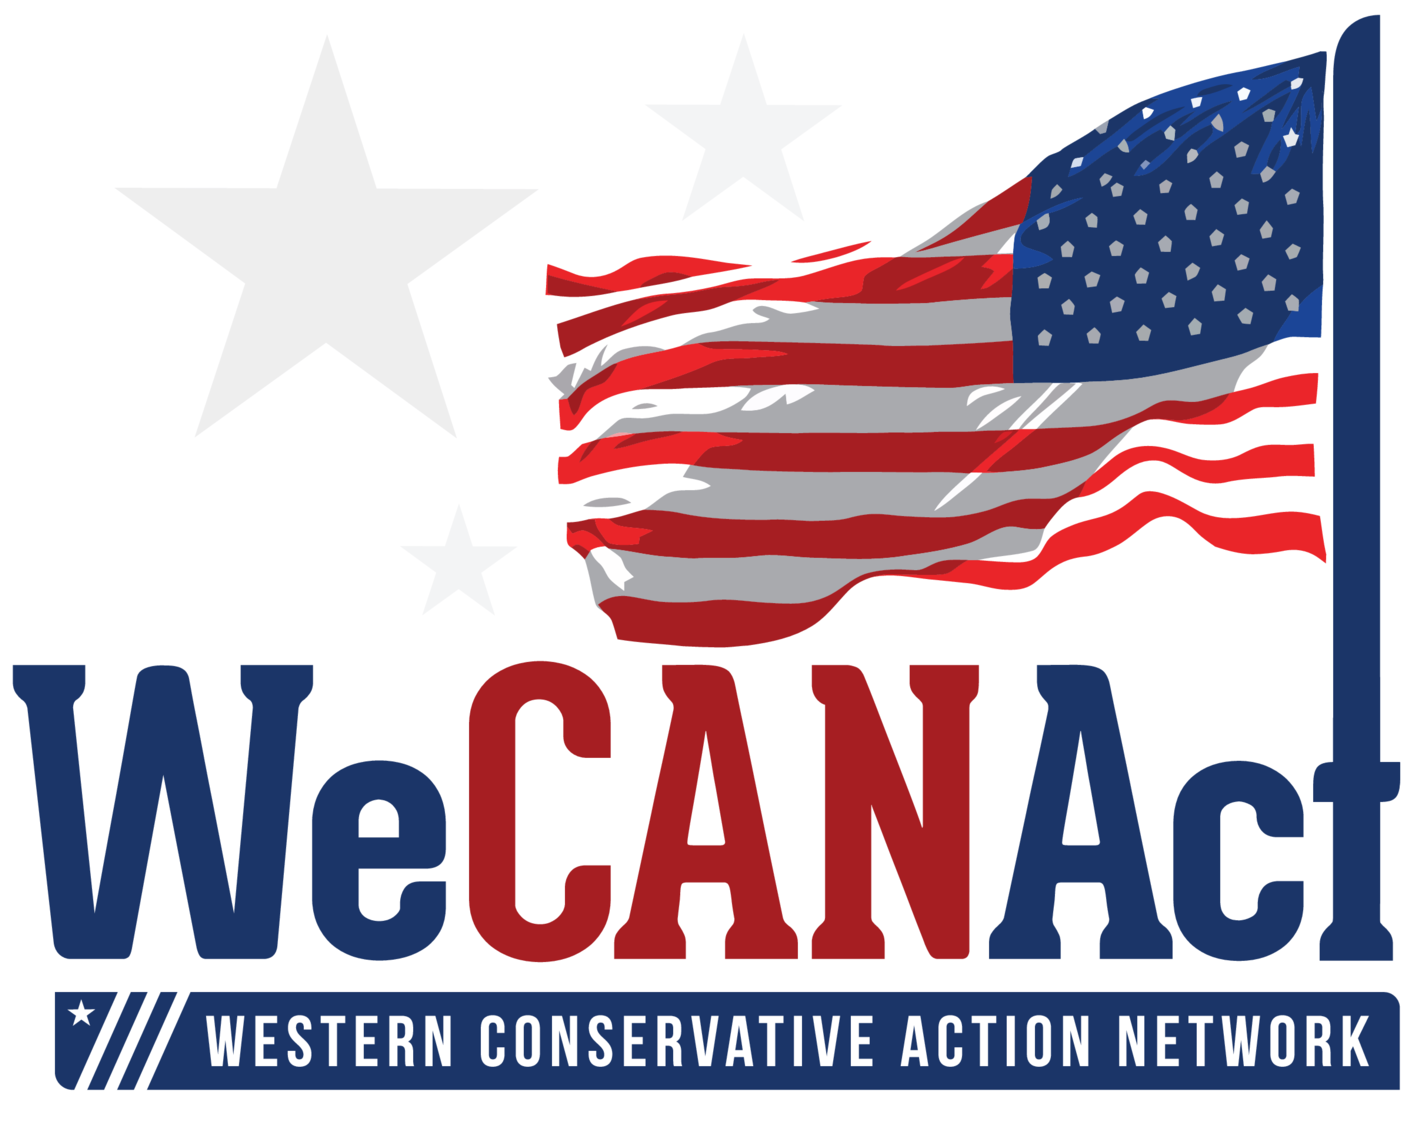 Episode 68: We Can Act Liberty Conference